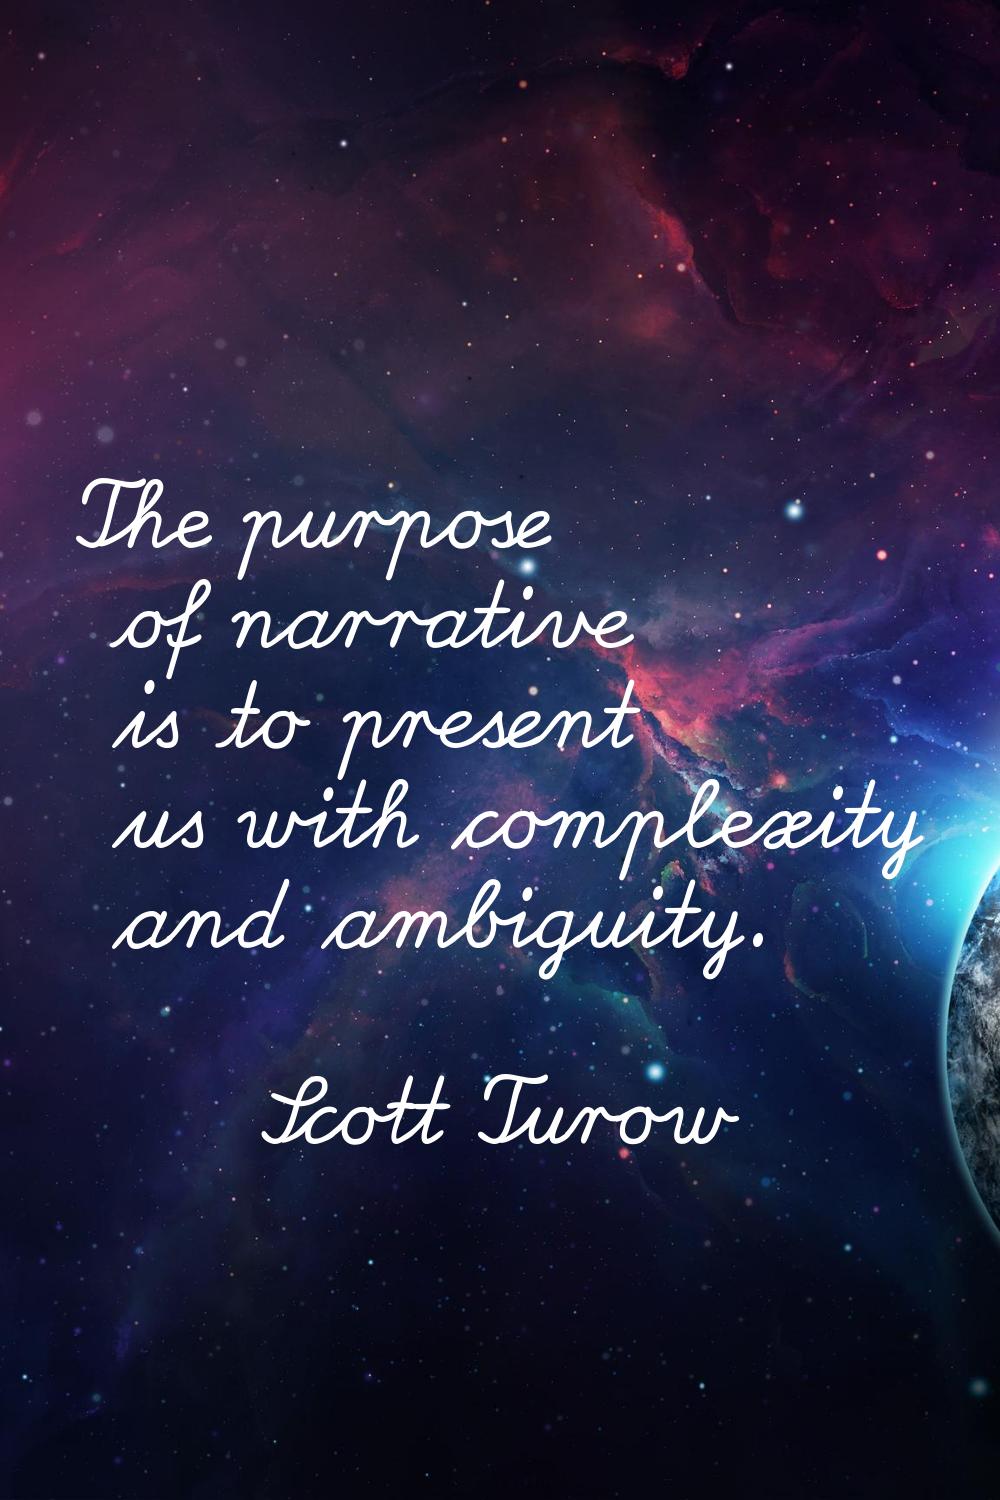 The purpose of narrative is to present us with complexity and ambiguity.